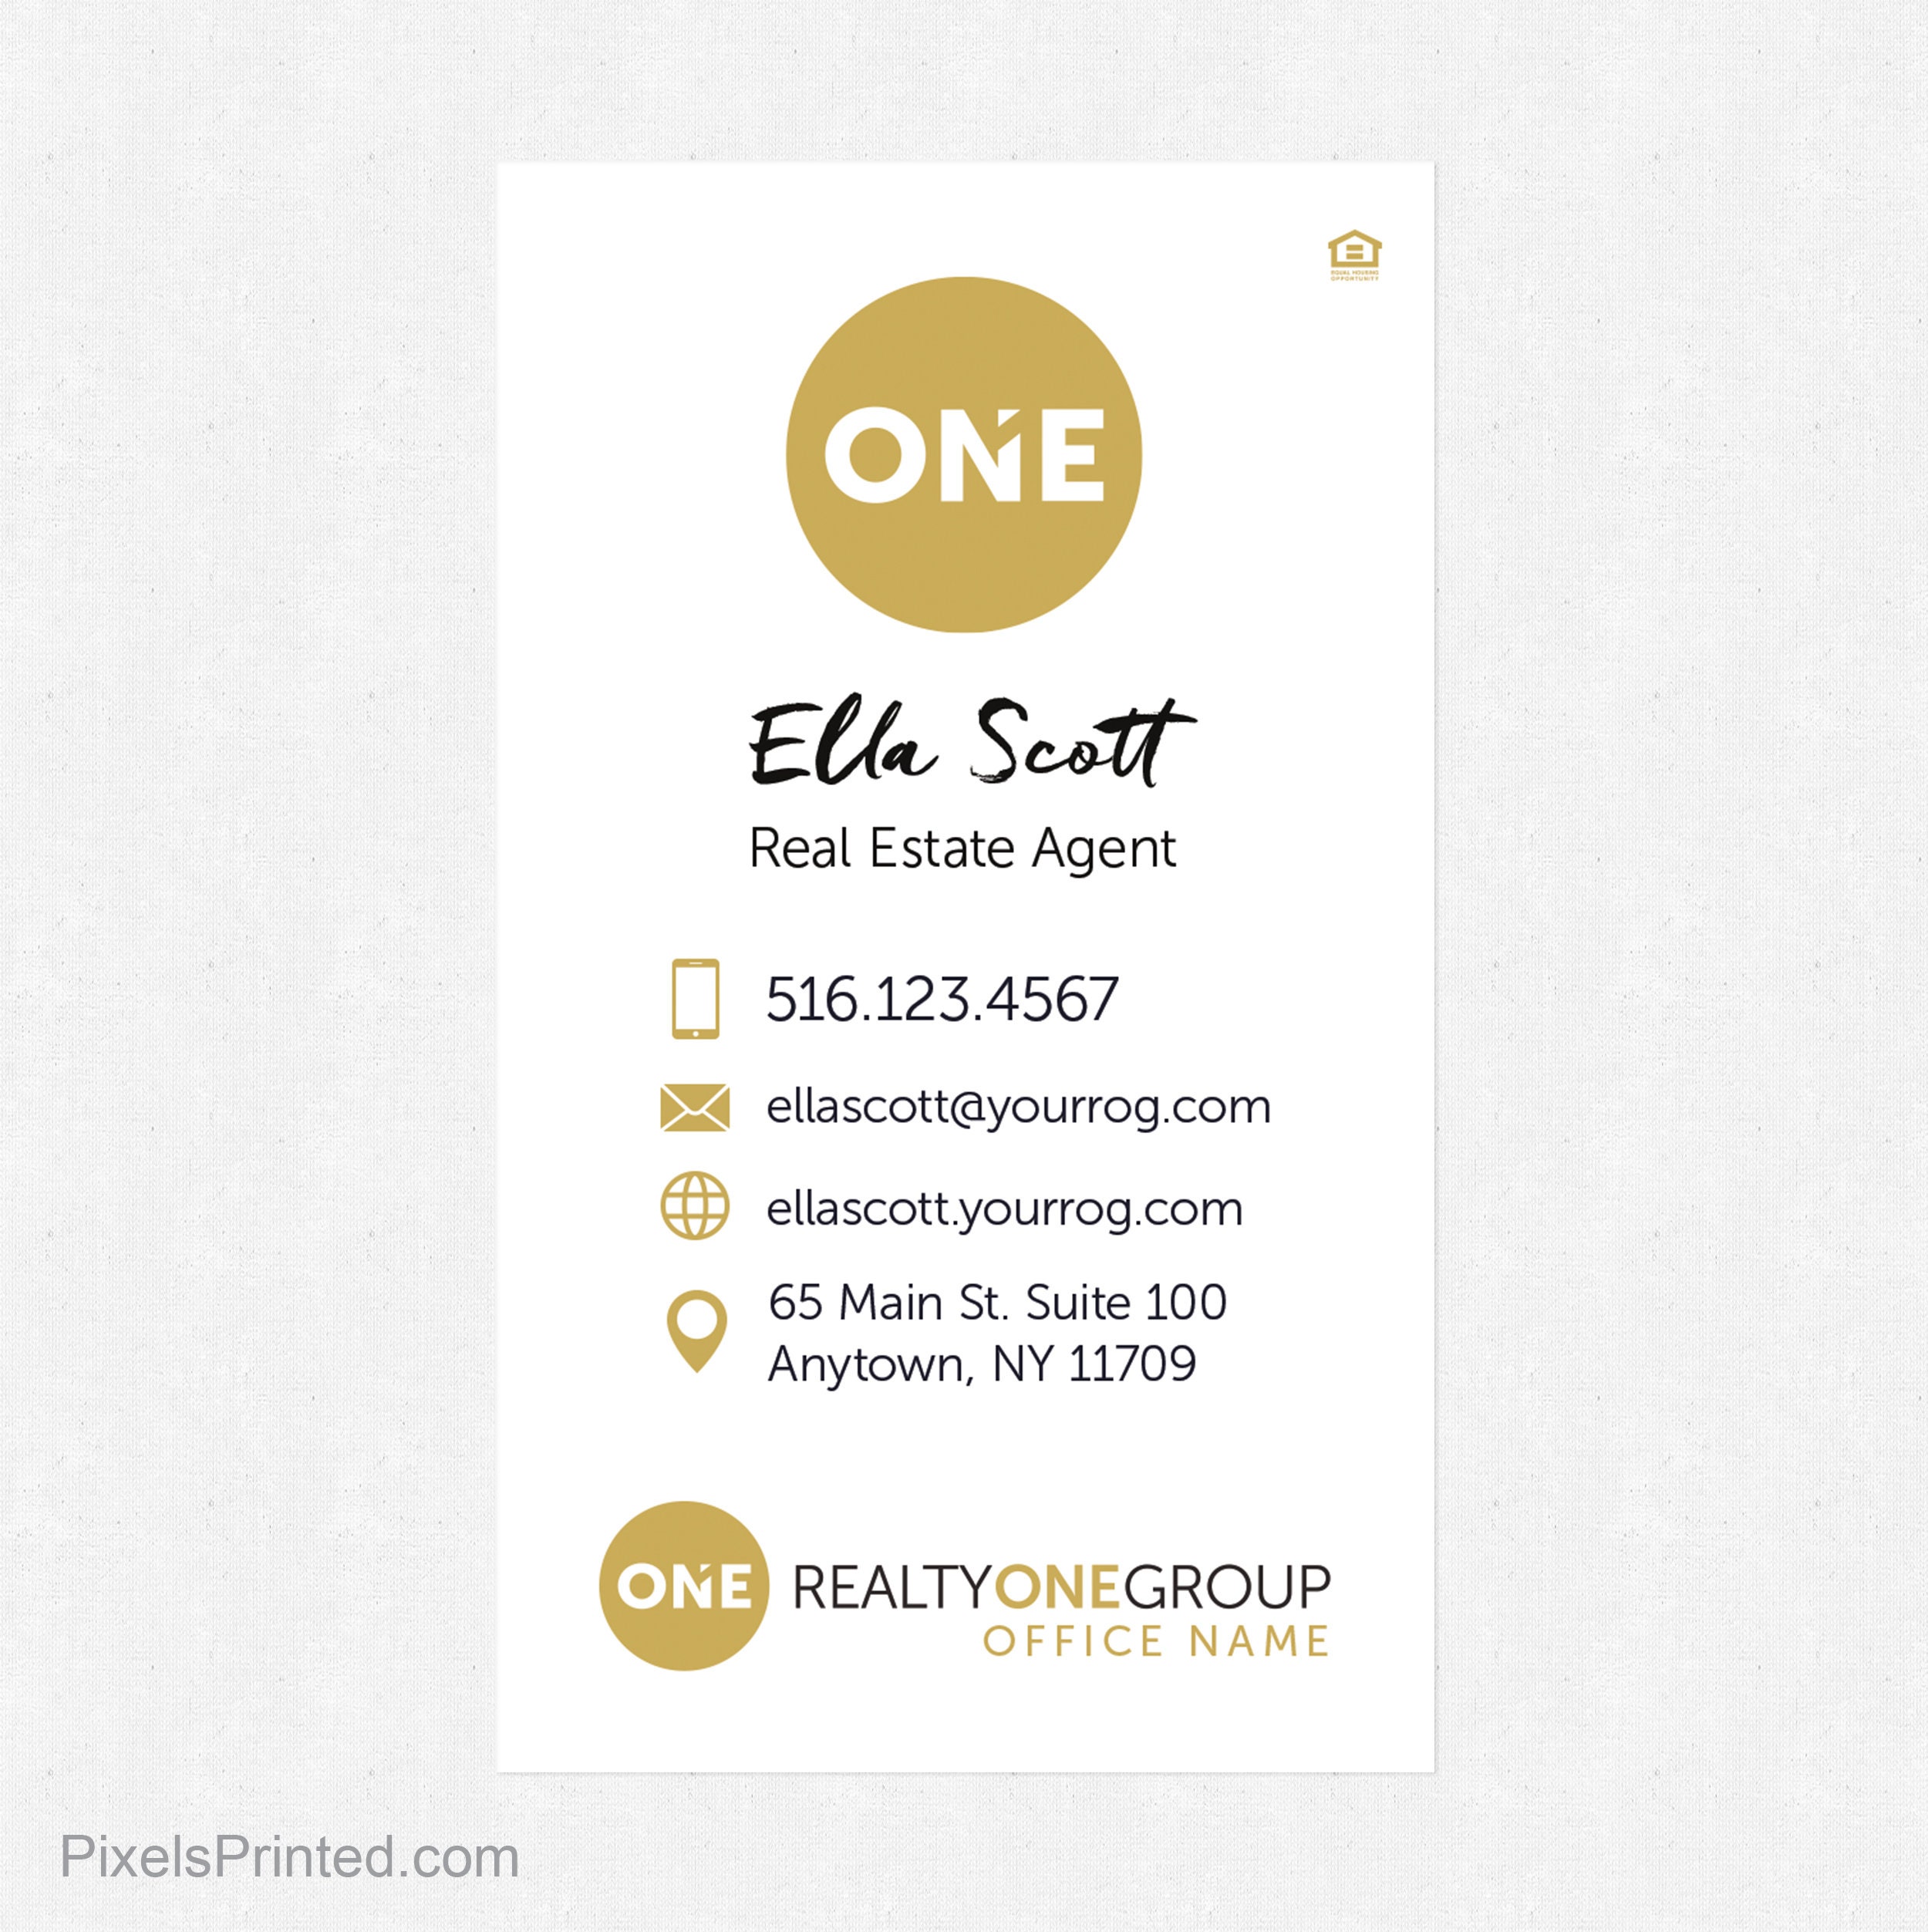 LONG REALTY FRIDGE – BUSINESS CARD MAGNETS 